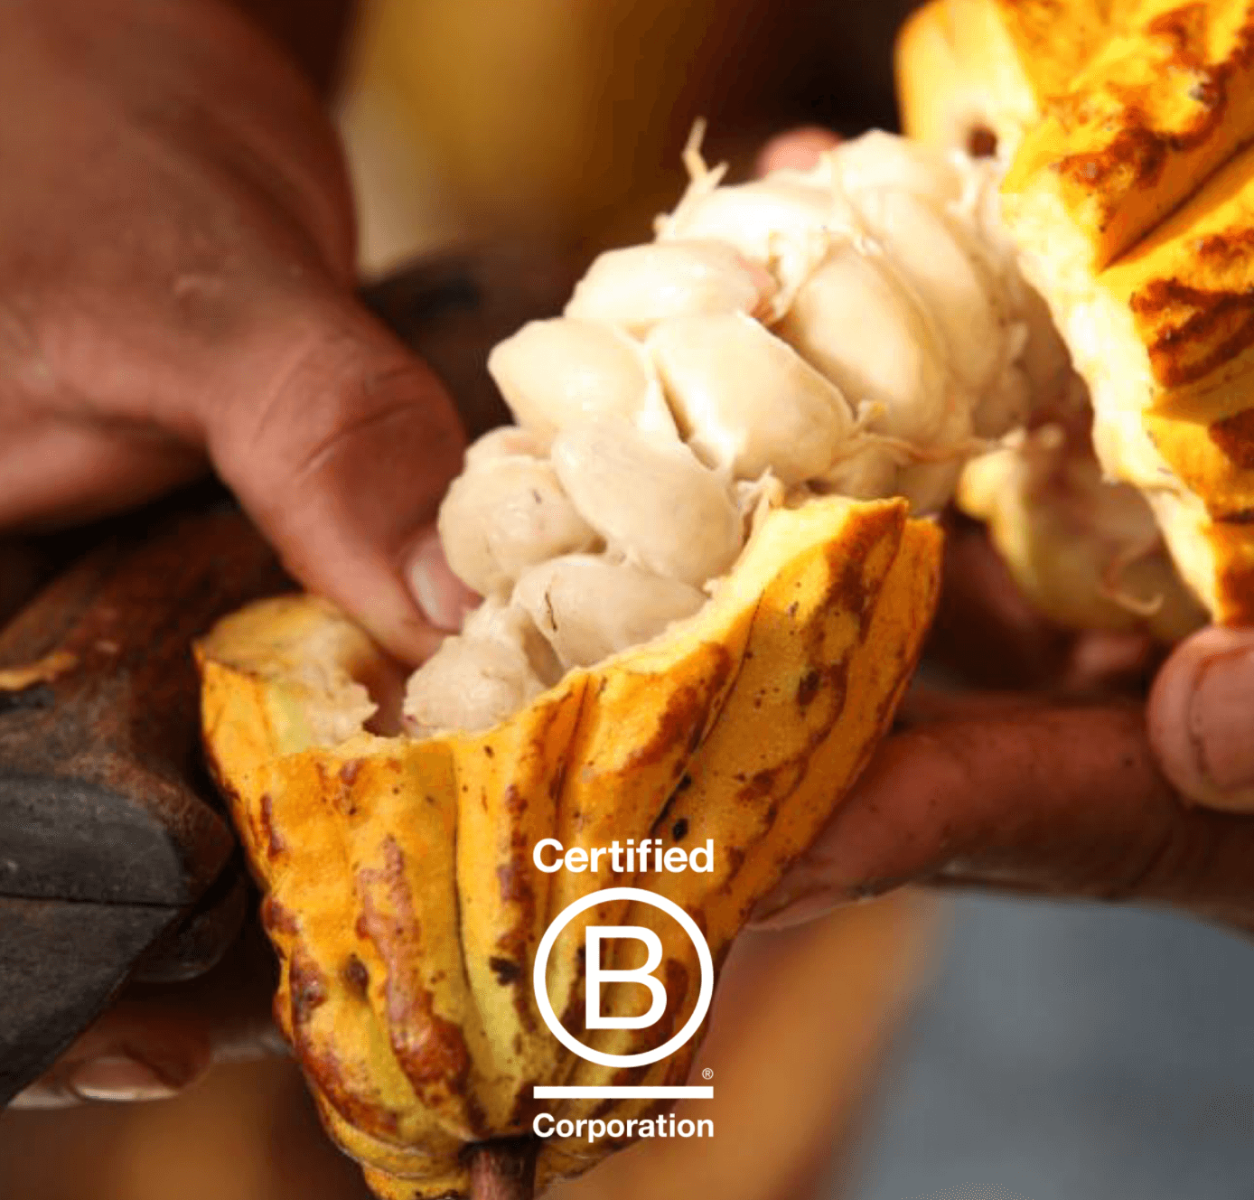 What makes Valrhona a B Corp